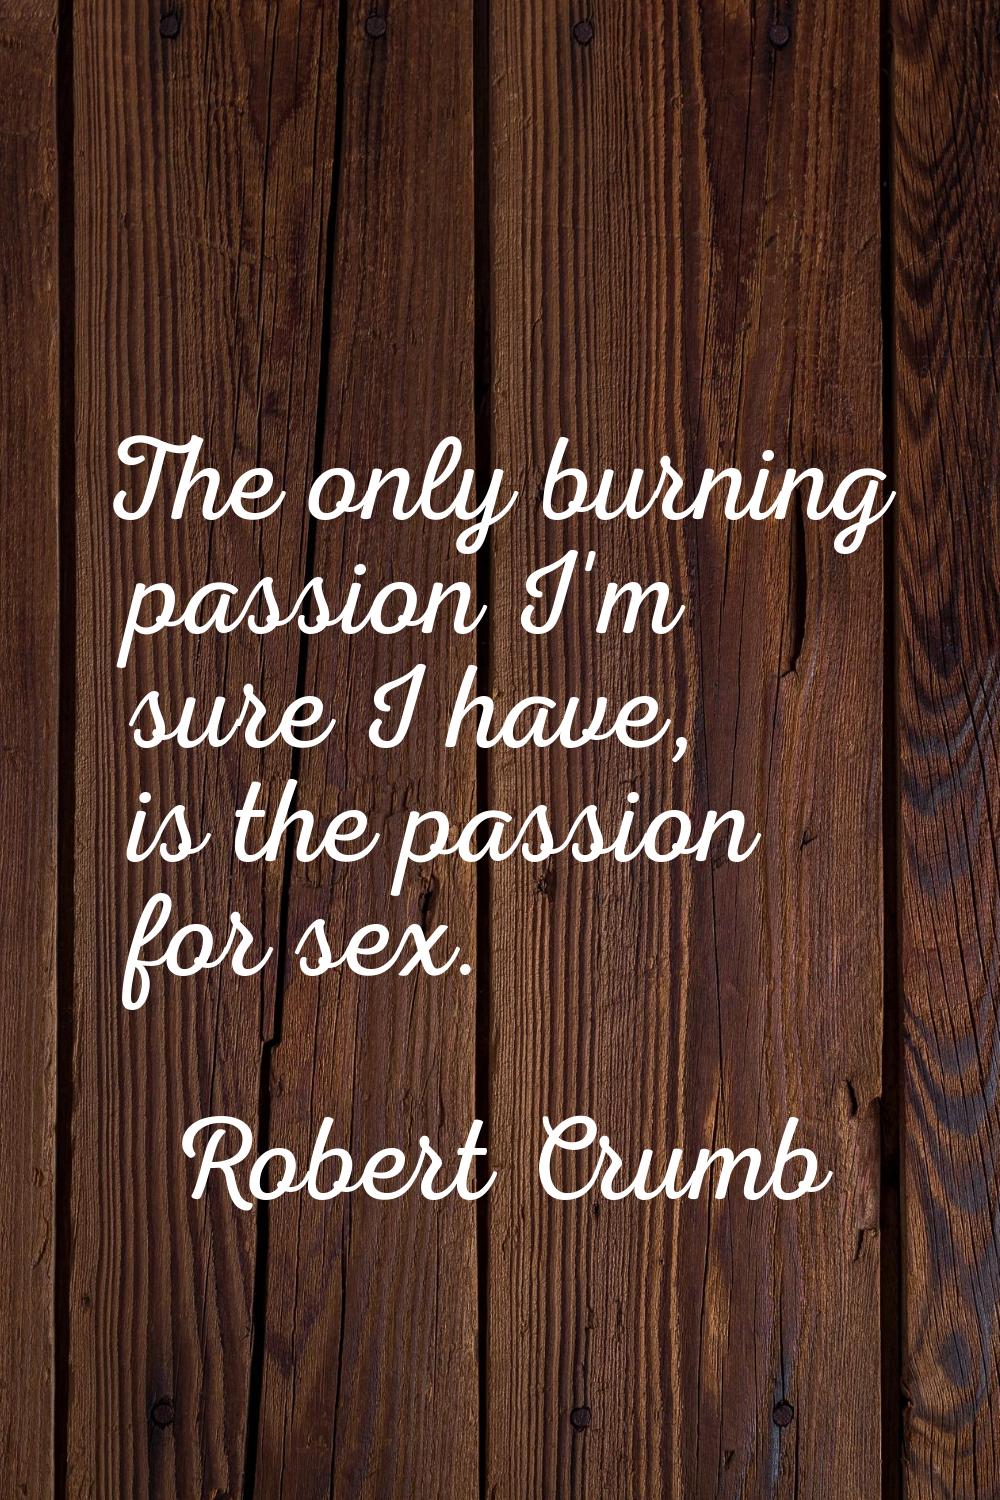 The only burning passion I'm sure I have, is the passion for sex.